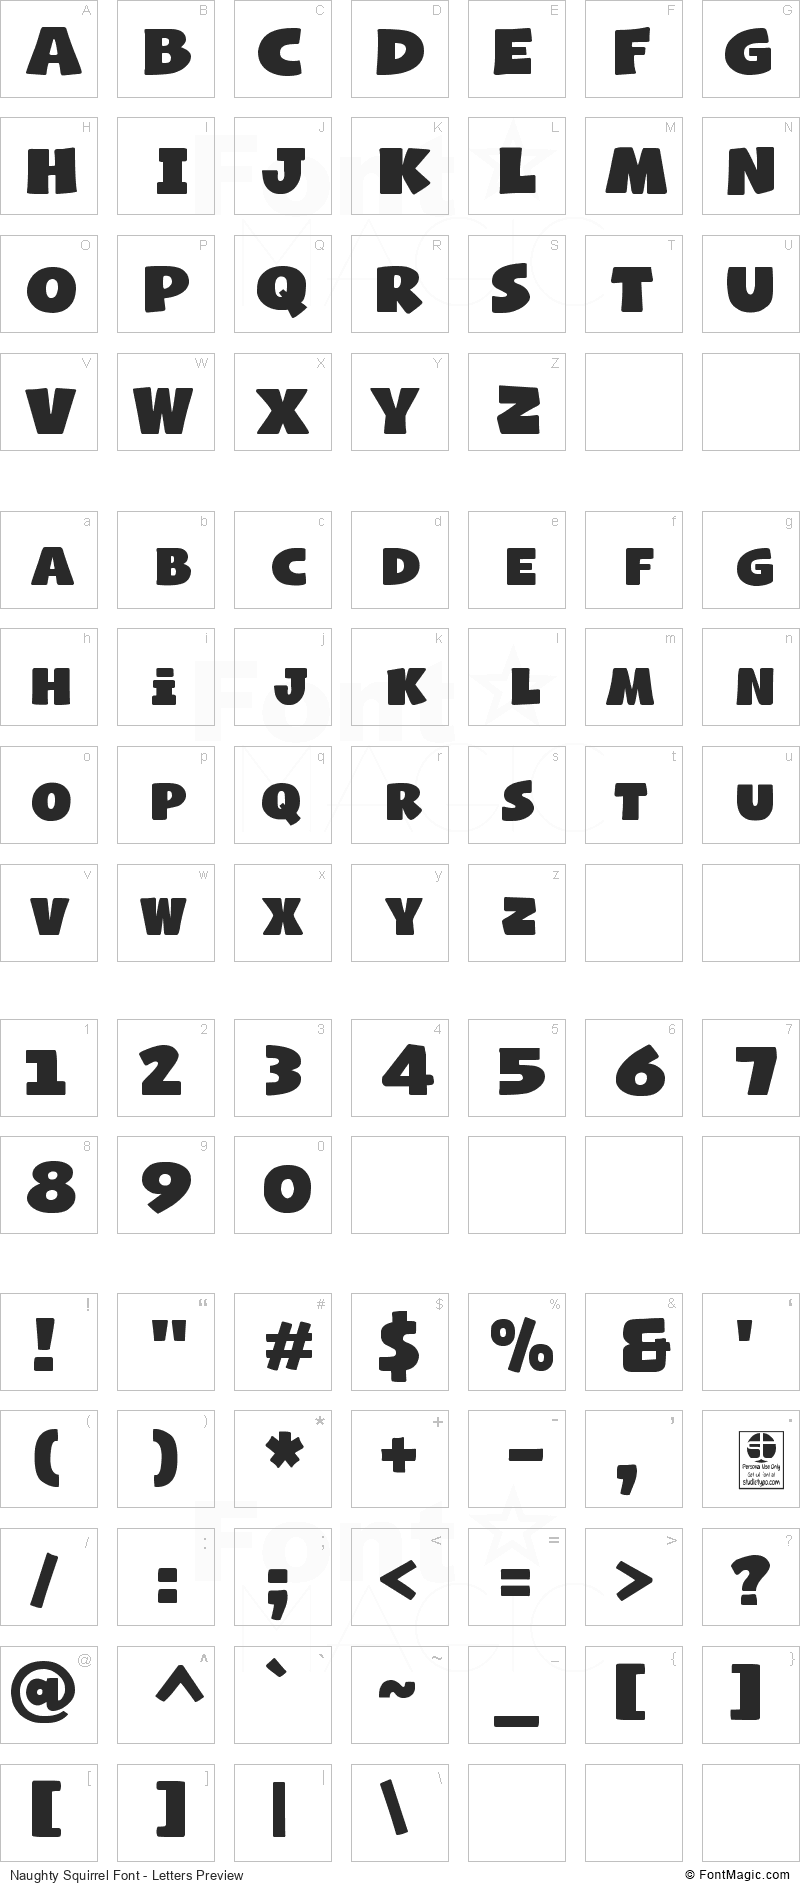 Naughty Squirrel Font - All Latters Preview Chart